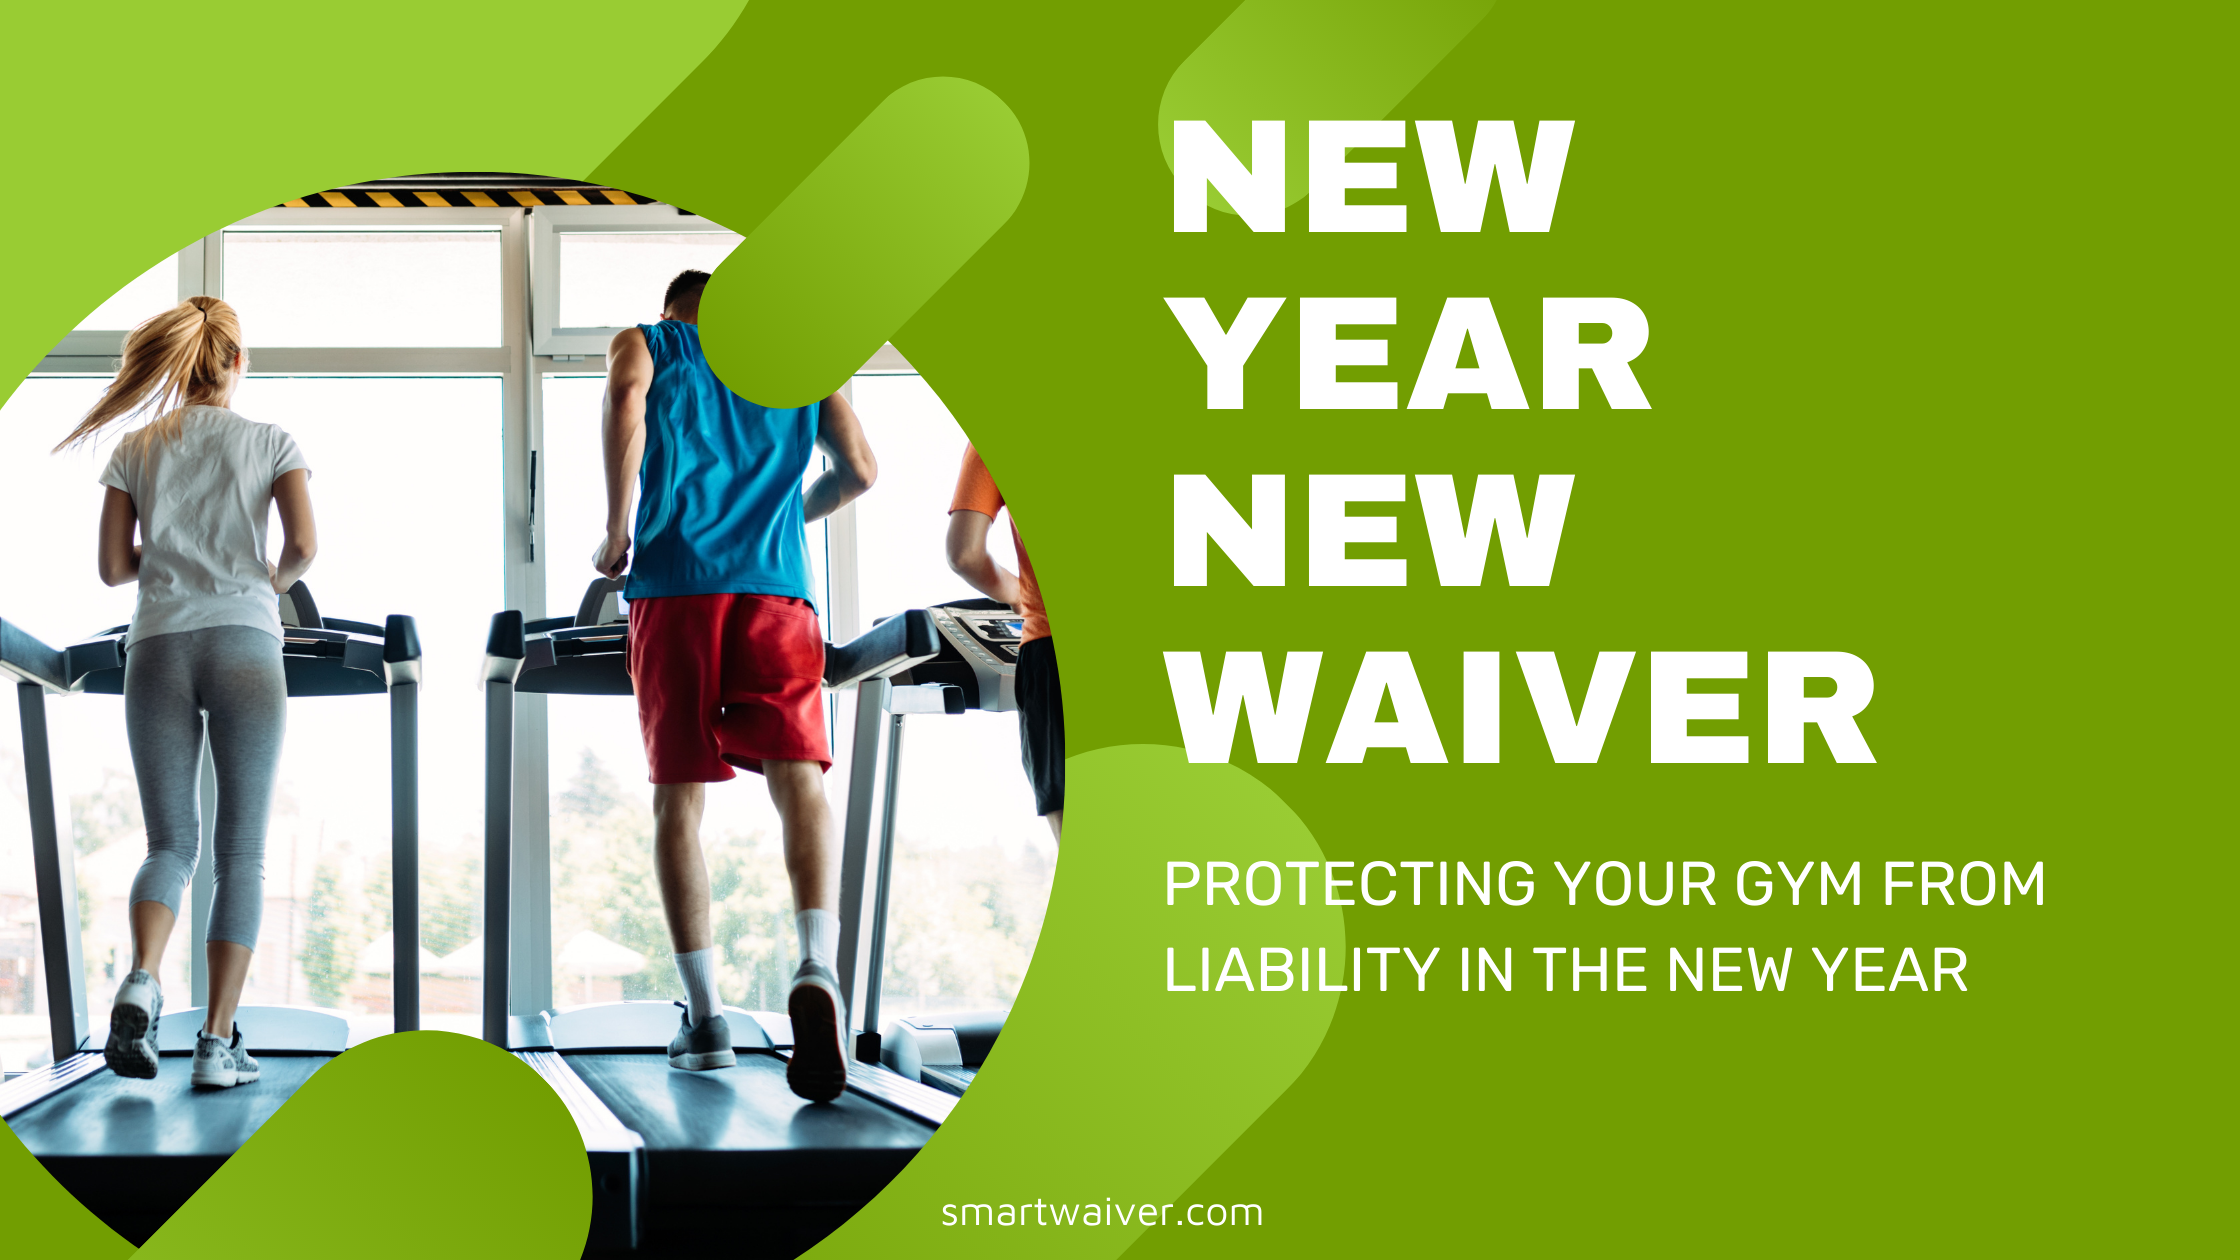 New Year, New Waiver - How to Protect Your Gym From Liability